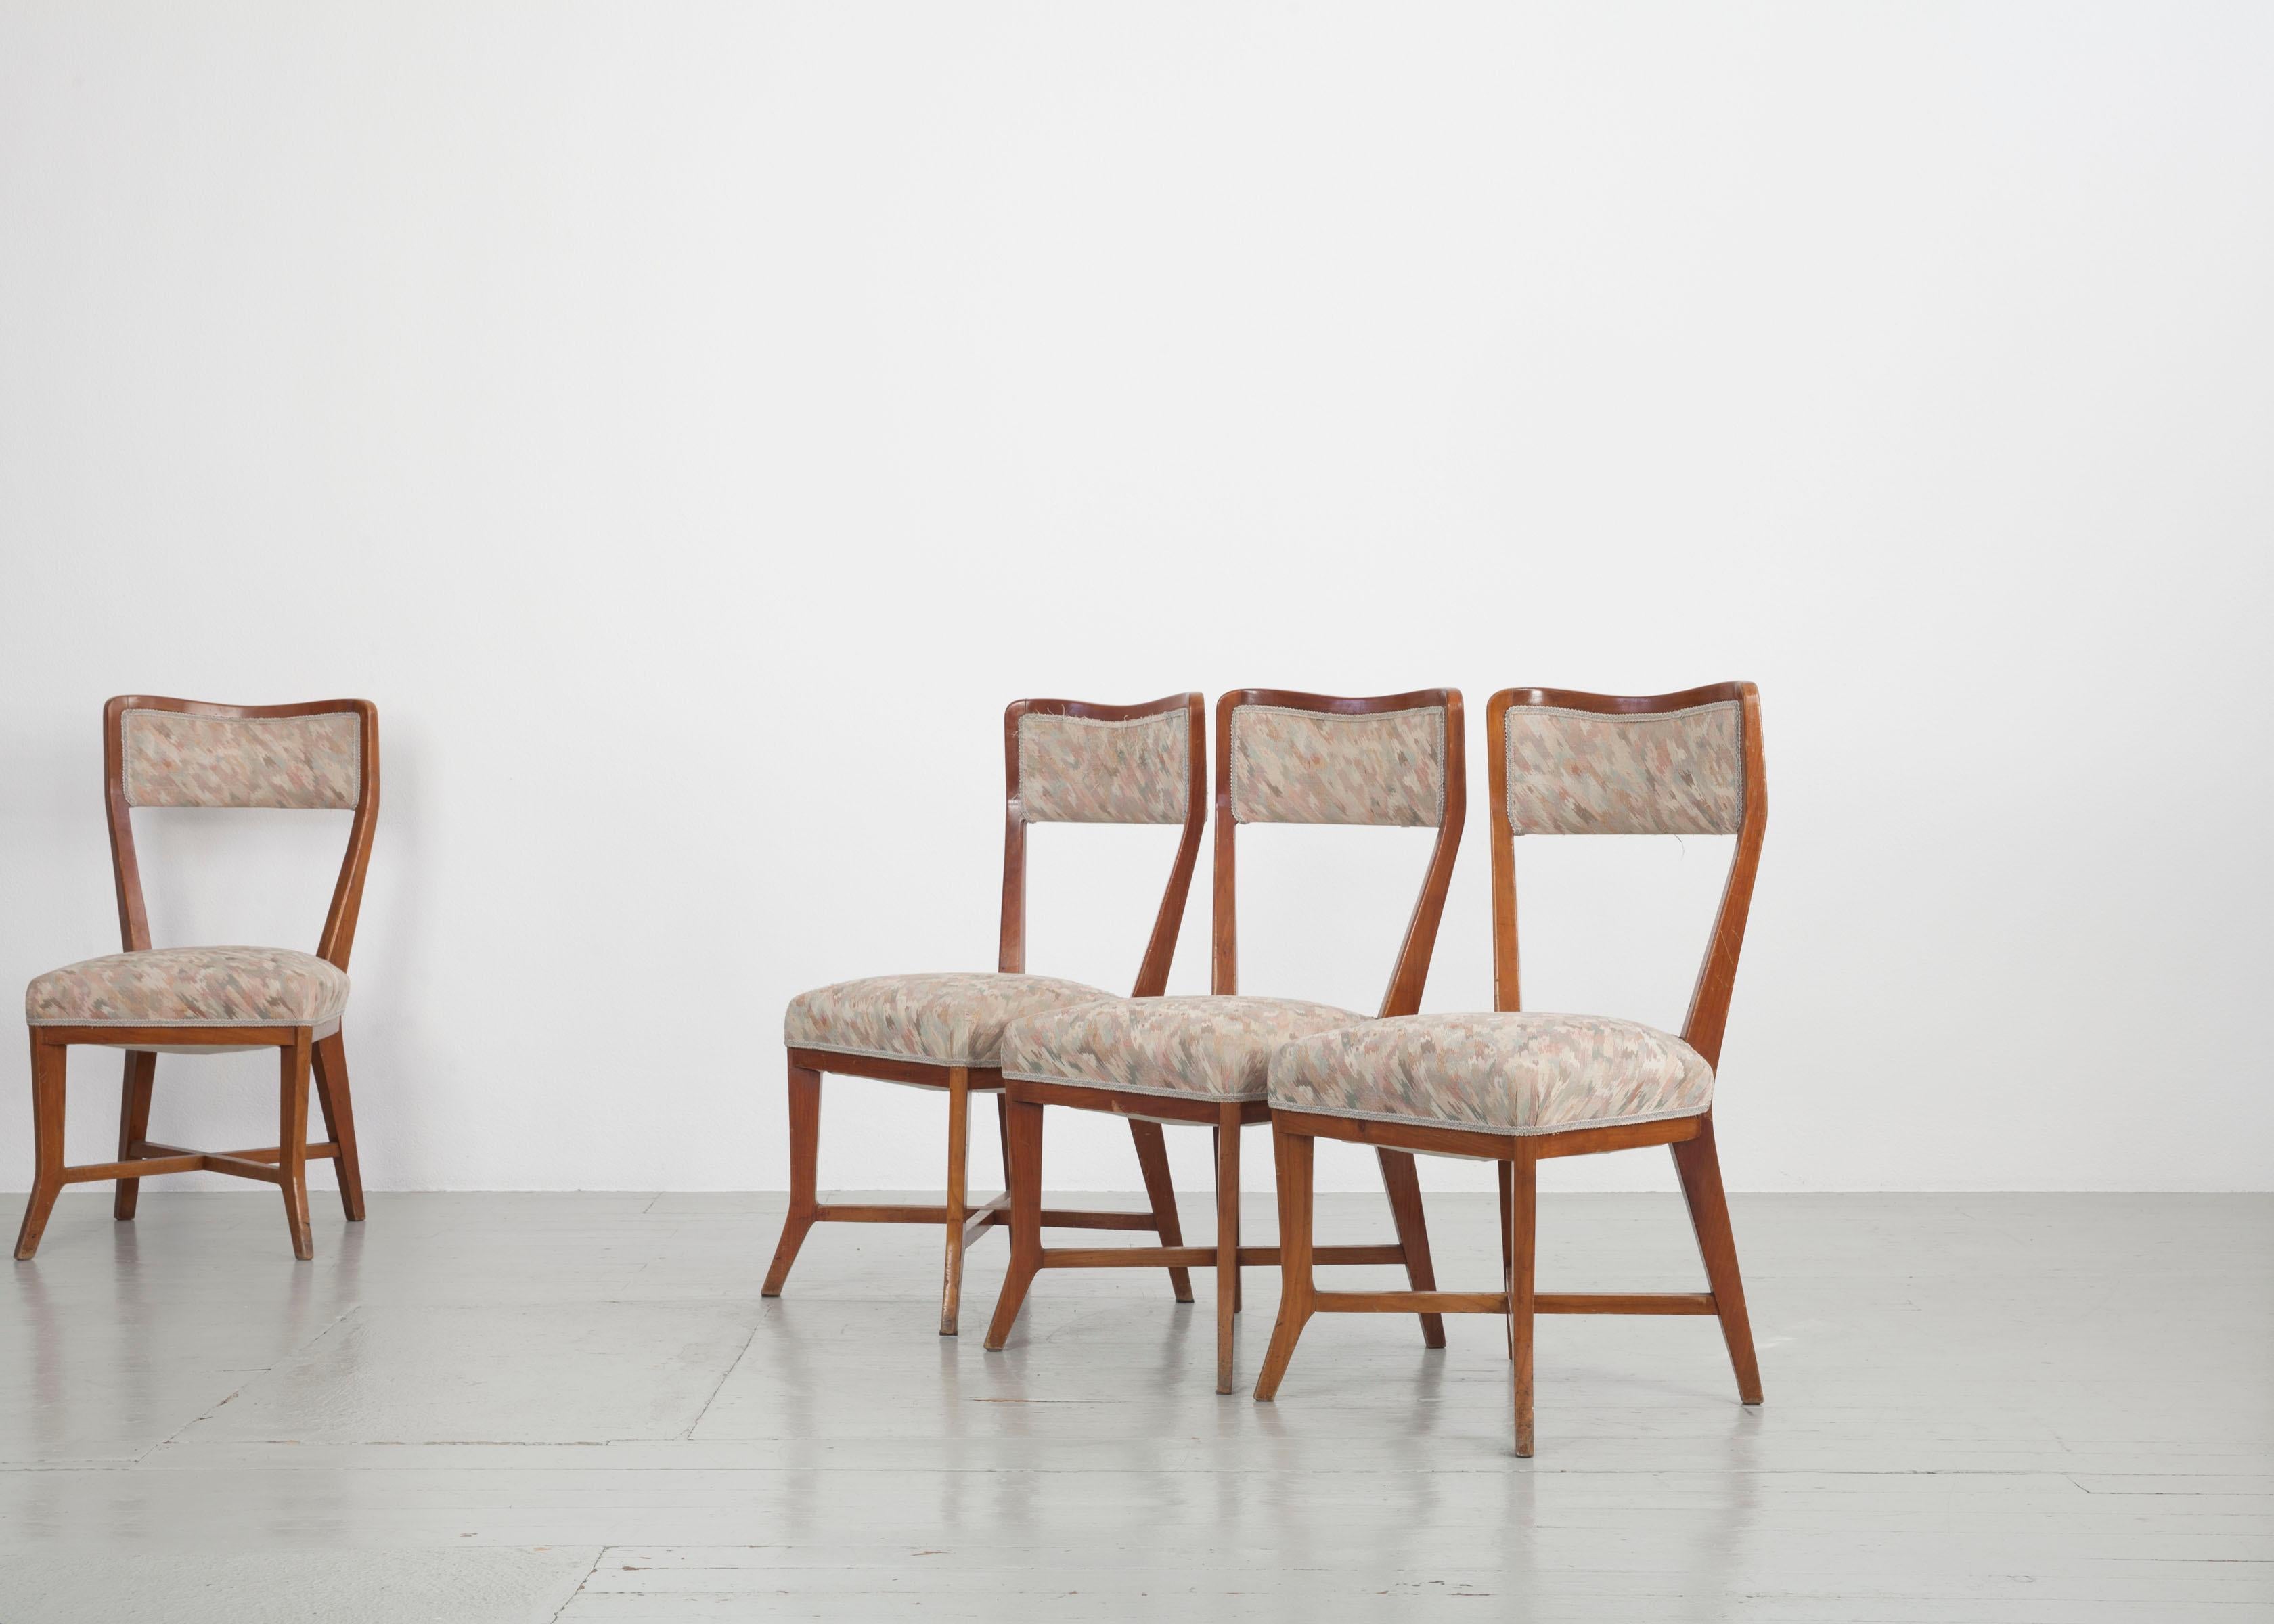 Set of 6 Melchiorre Bega Chairs Made of Cherrywood, Italy, 1950s For Sale 5